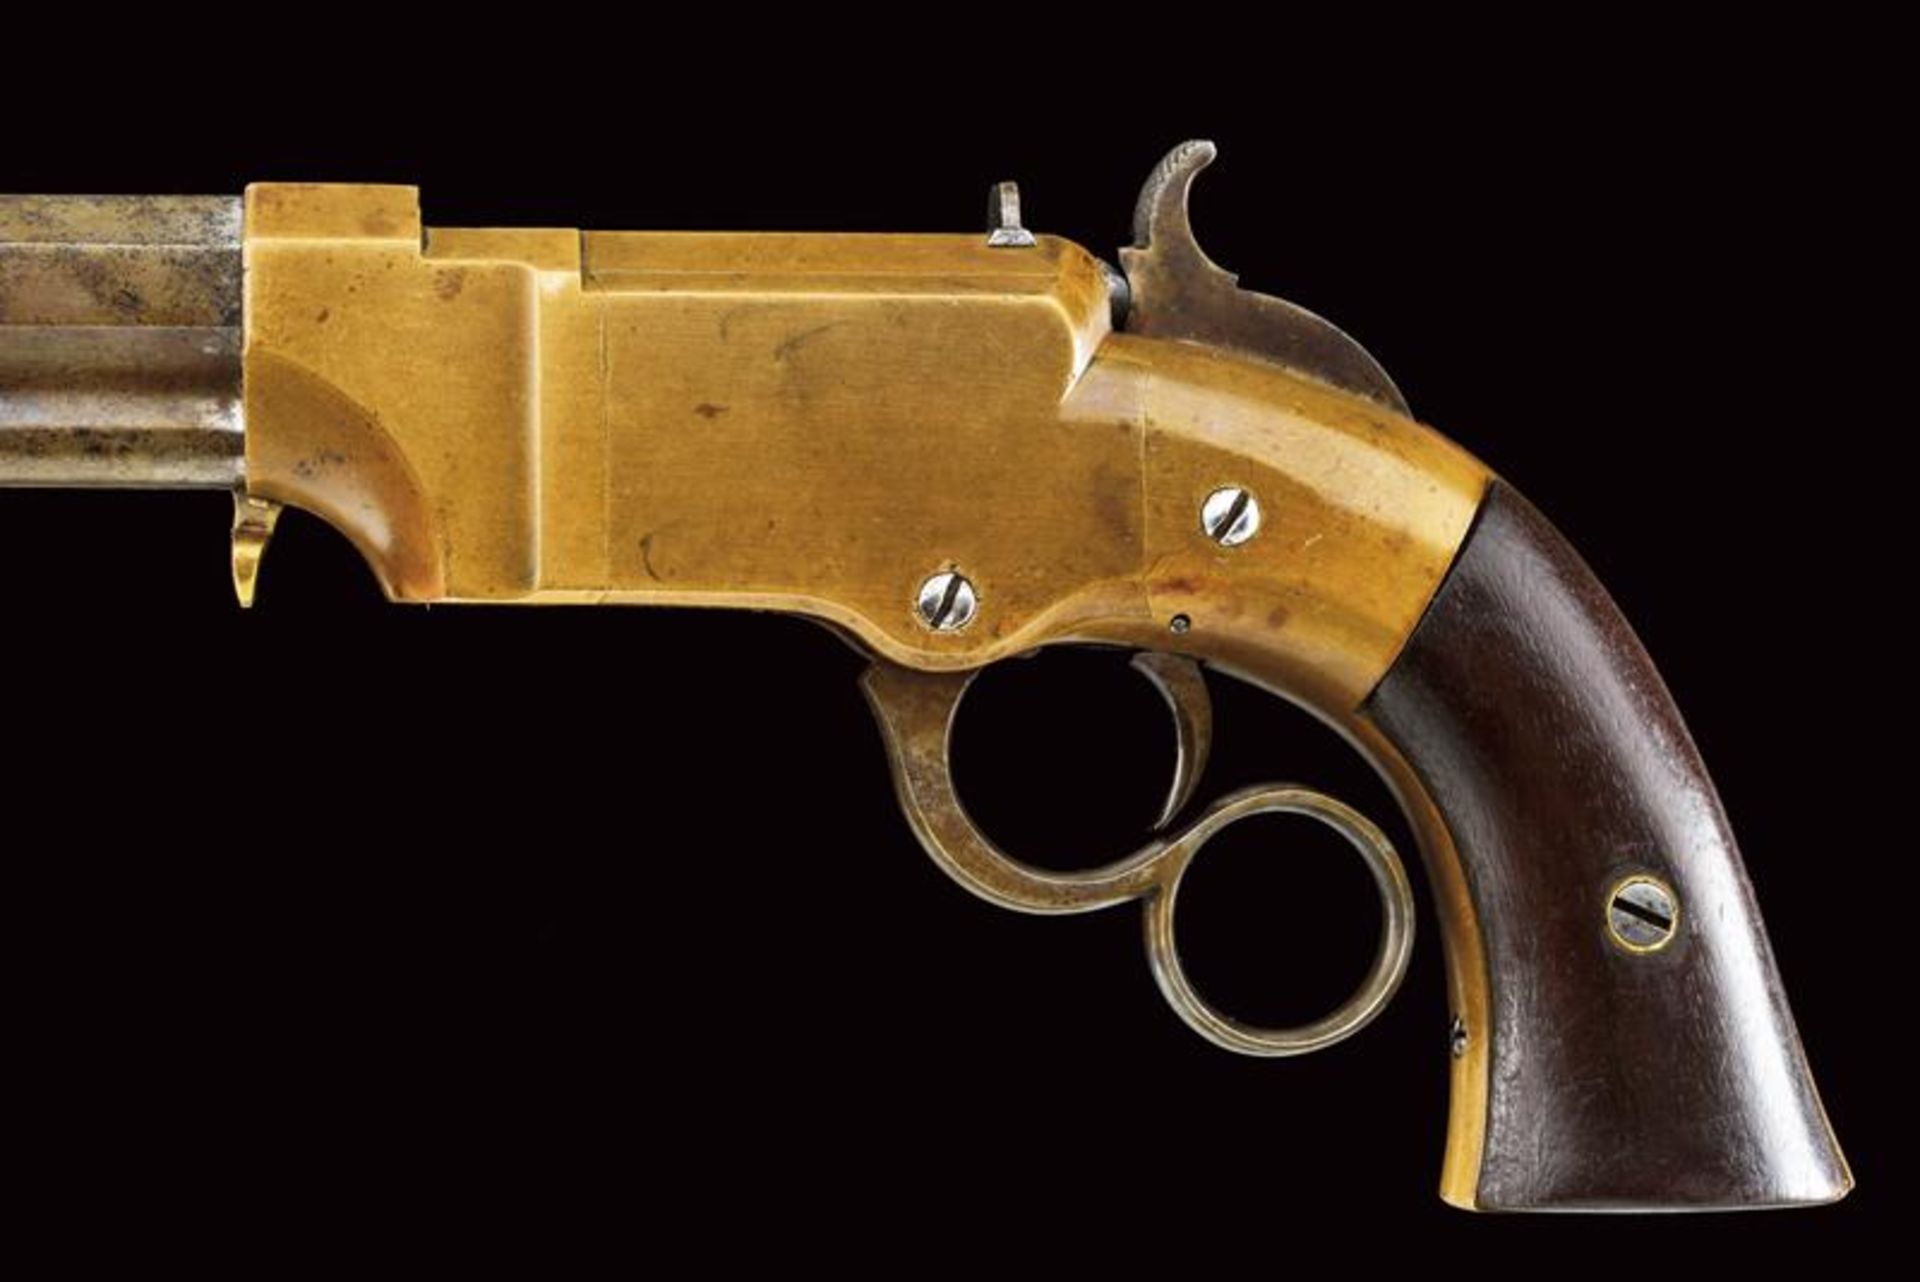 A Volcanic Lever Action No. 1 Pocket Pistol - Image 3 of 6